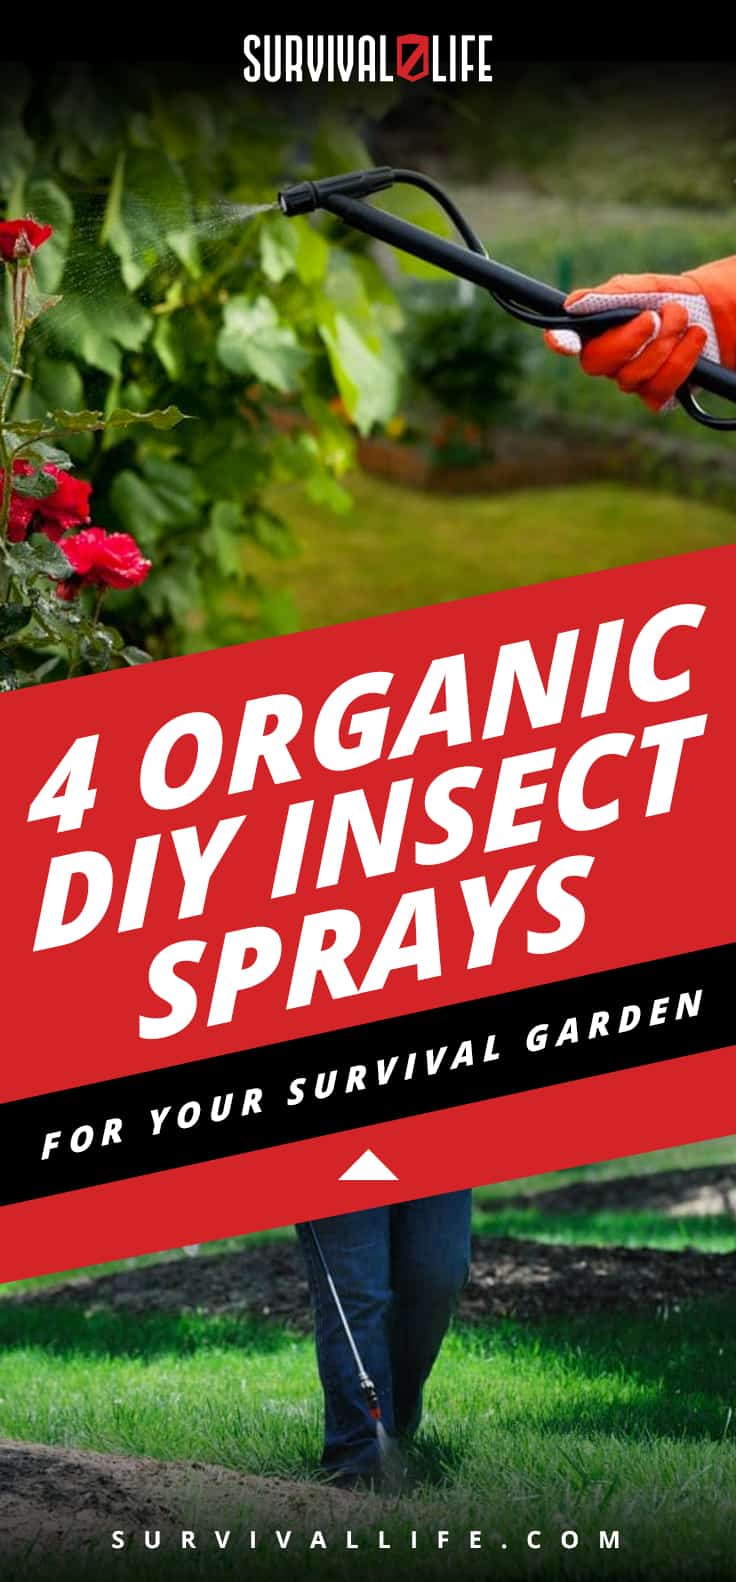 4 Organic DIY Insect Sprays For Your Survival Garden